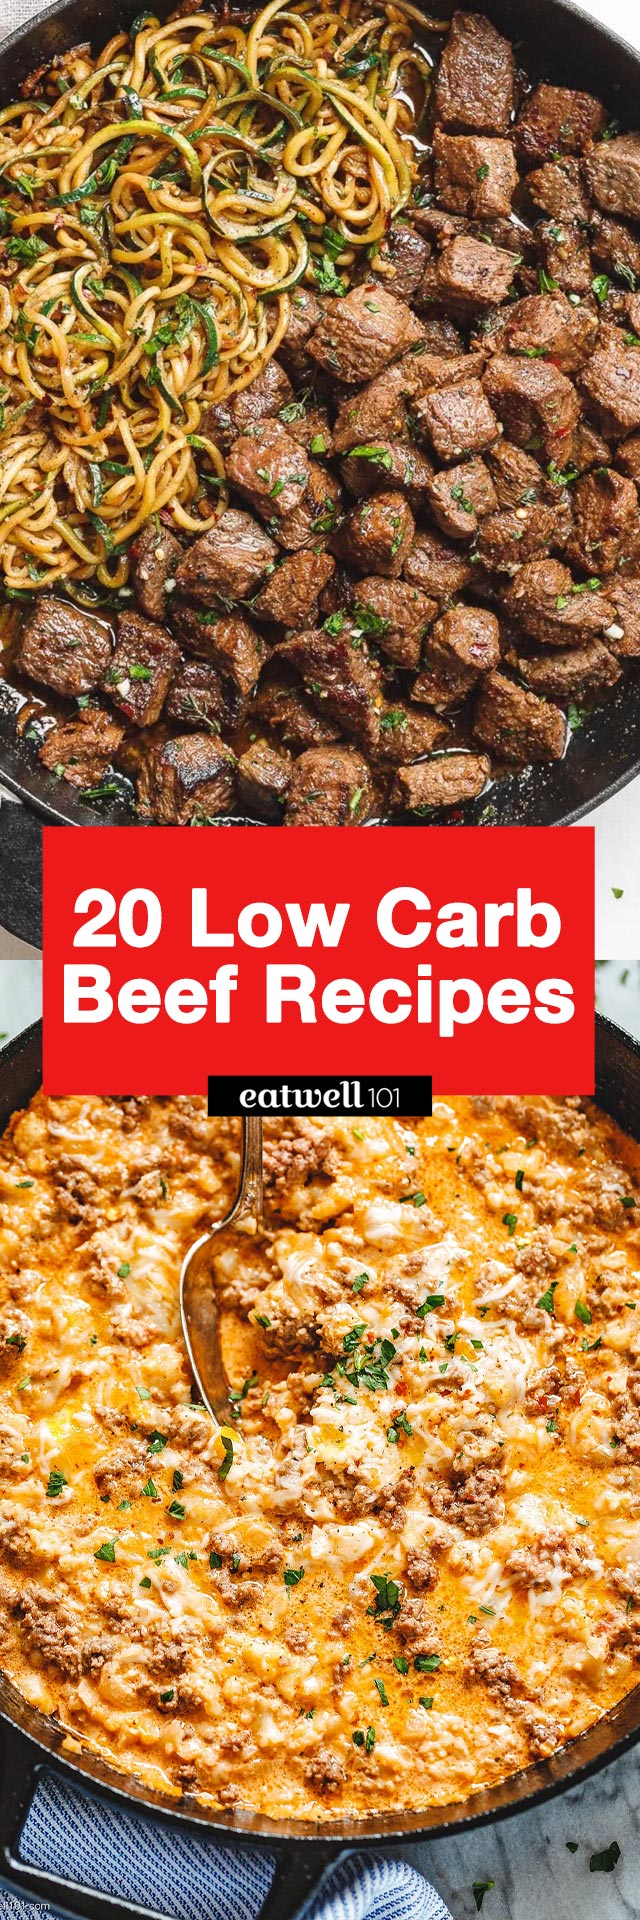 Low Carb Beef Recipes - #lowcarb #beef #steak #recipes #eatwell101 - Looking to feed your family fast? All our best low carb beef recipes are right here! 